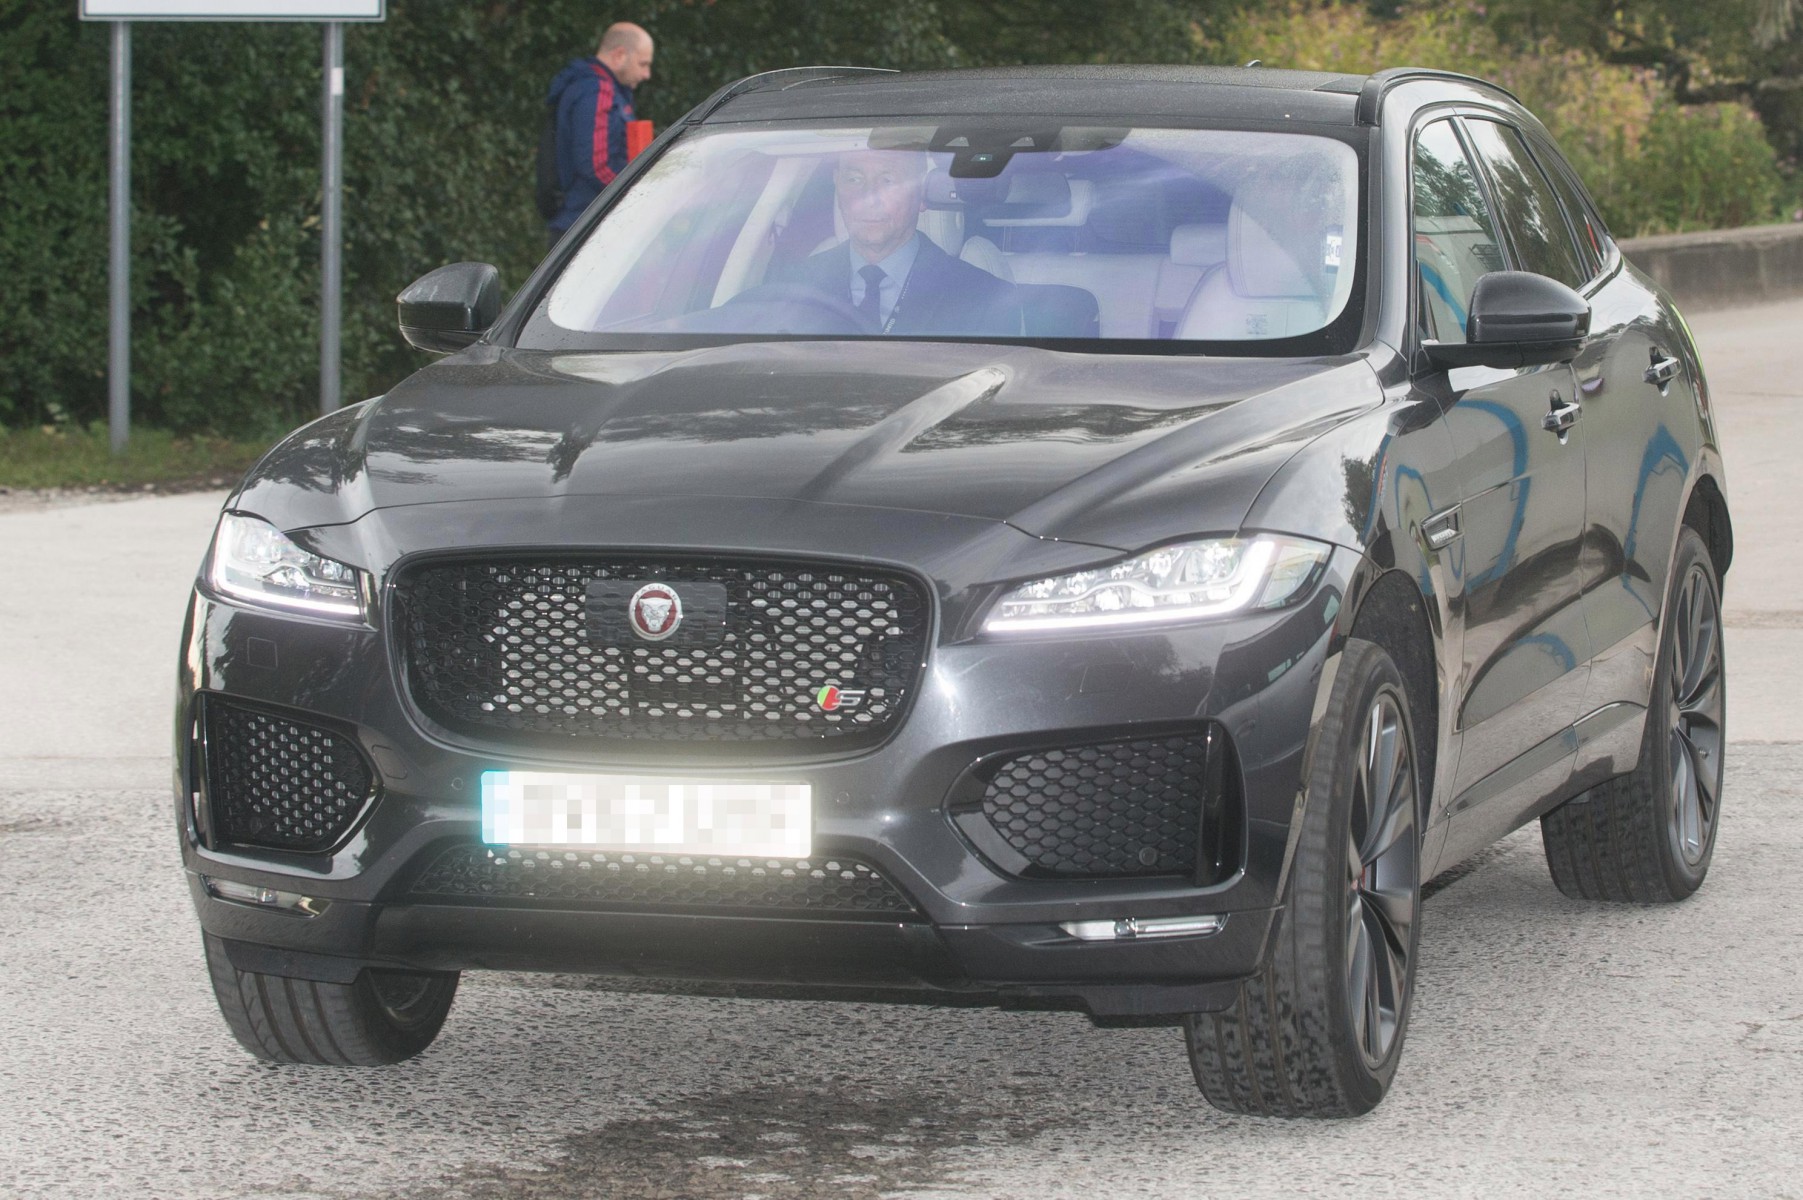 , Jose Mourinho cars: New Tottenham manager owns Jaguar F-Pace and Bentley, loves rallying but hates driving in England